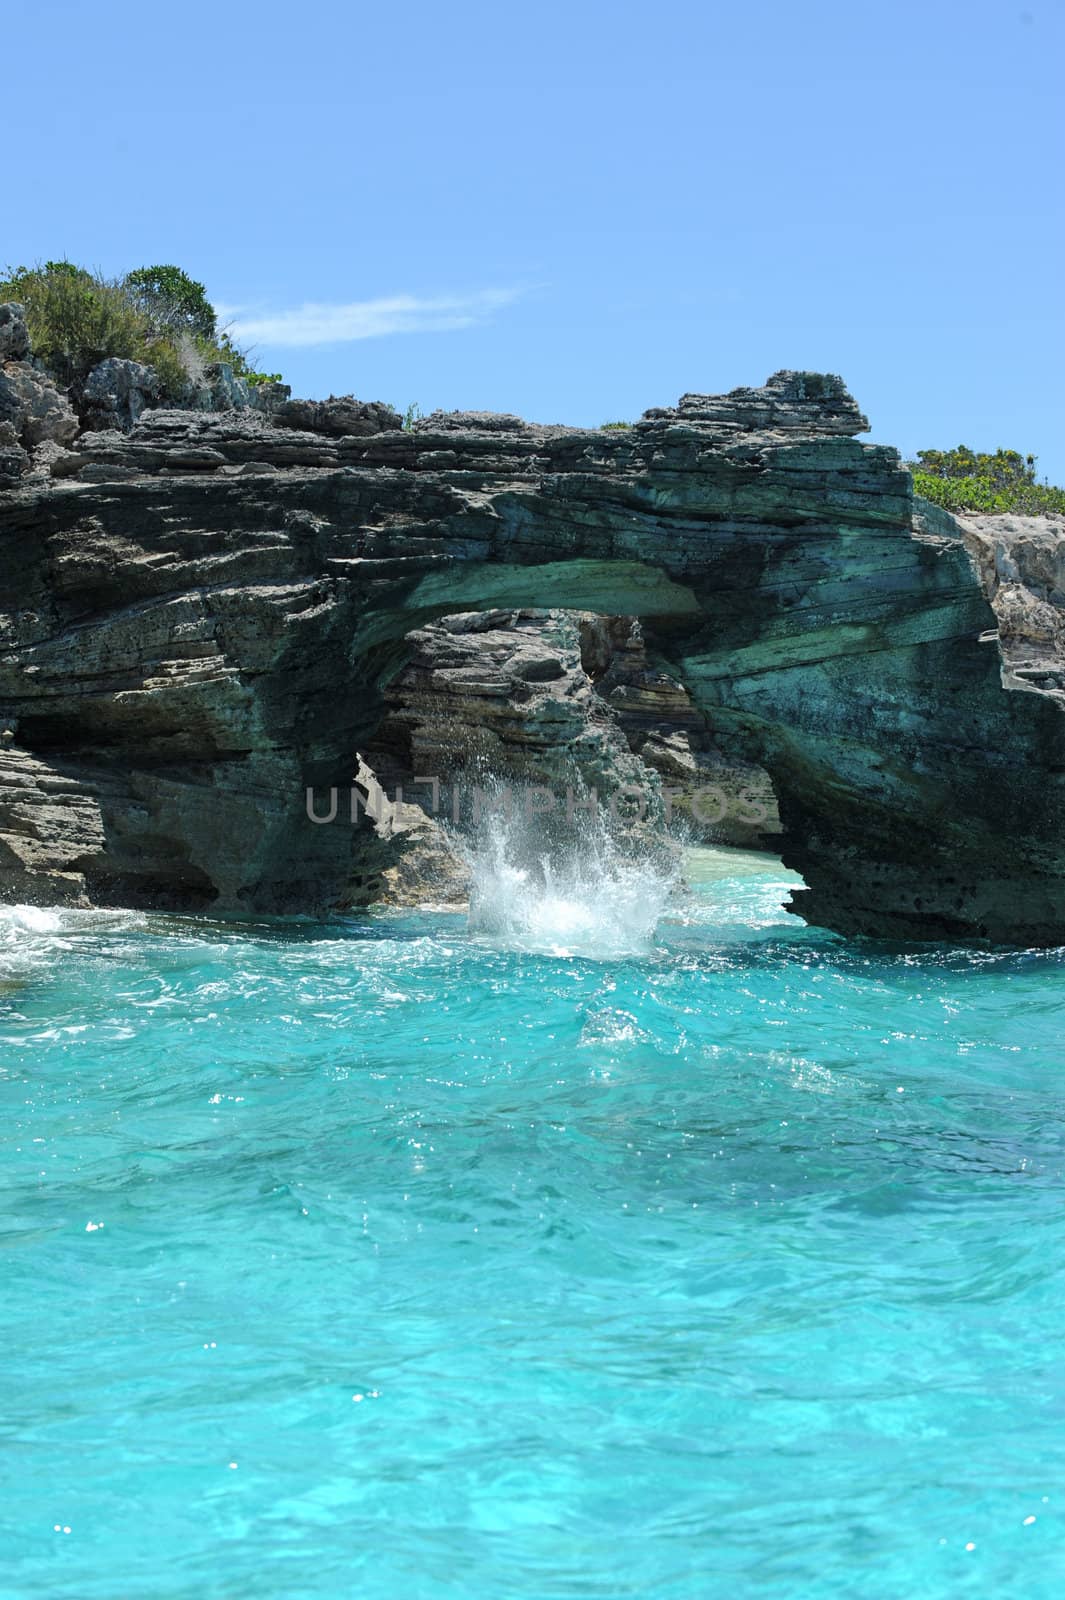 Rocks in shape of arch in the Bahamas with clear blue ocean water